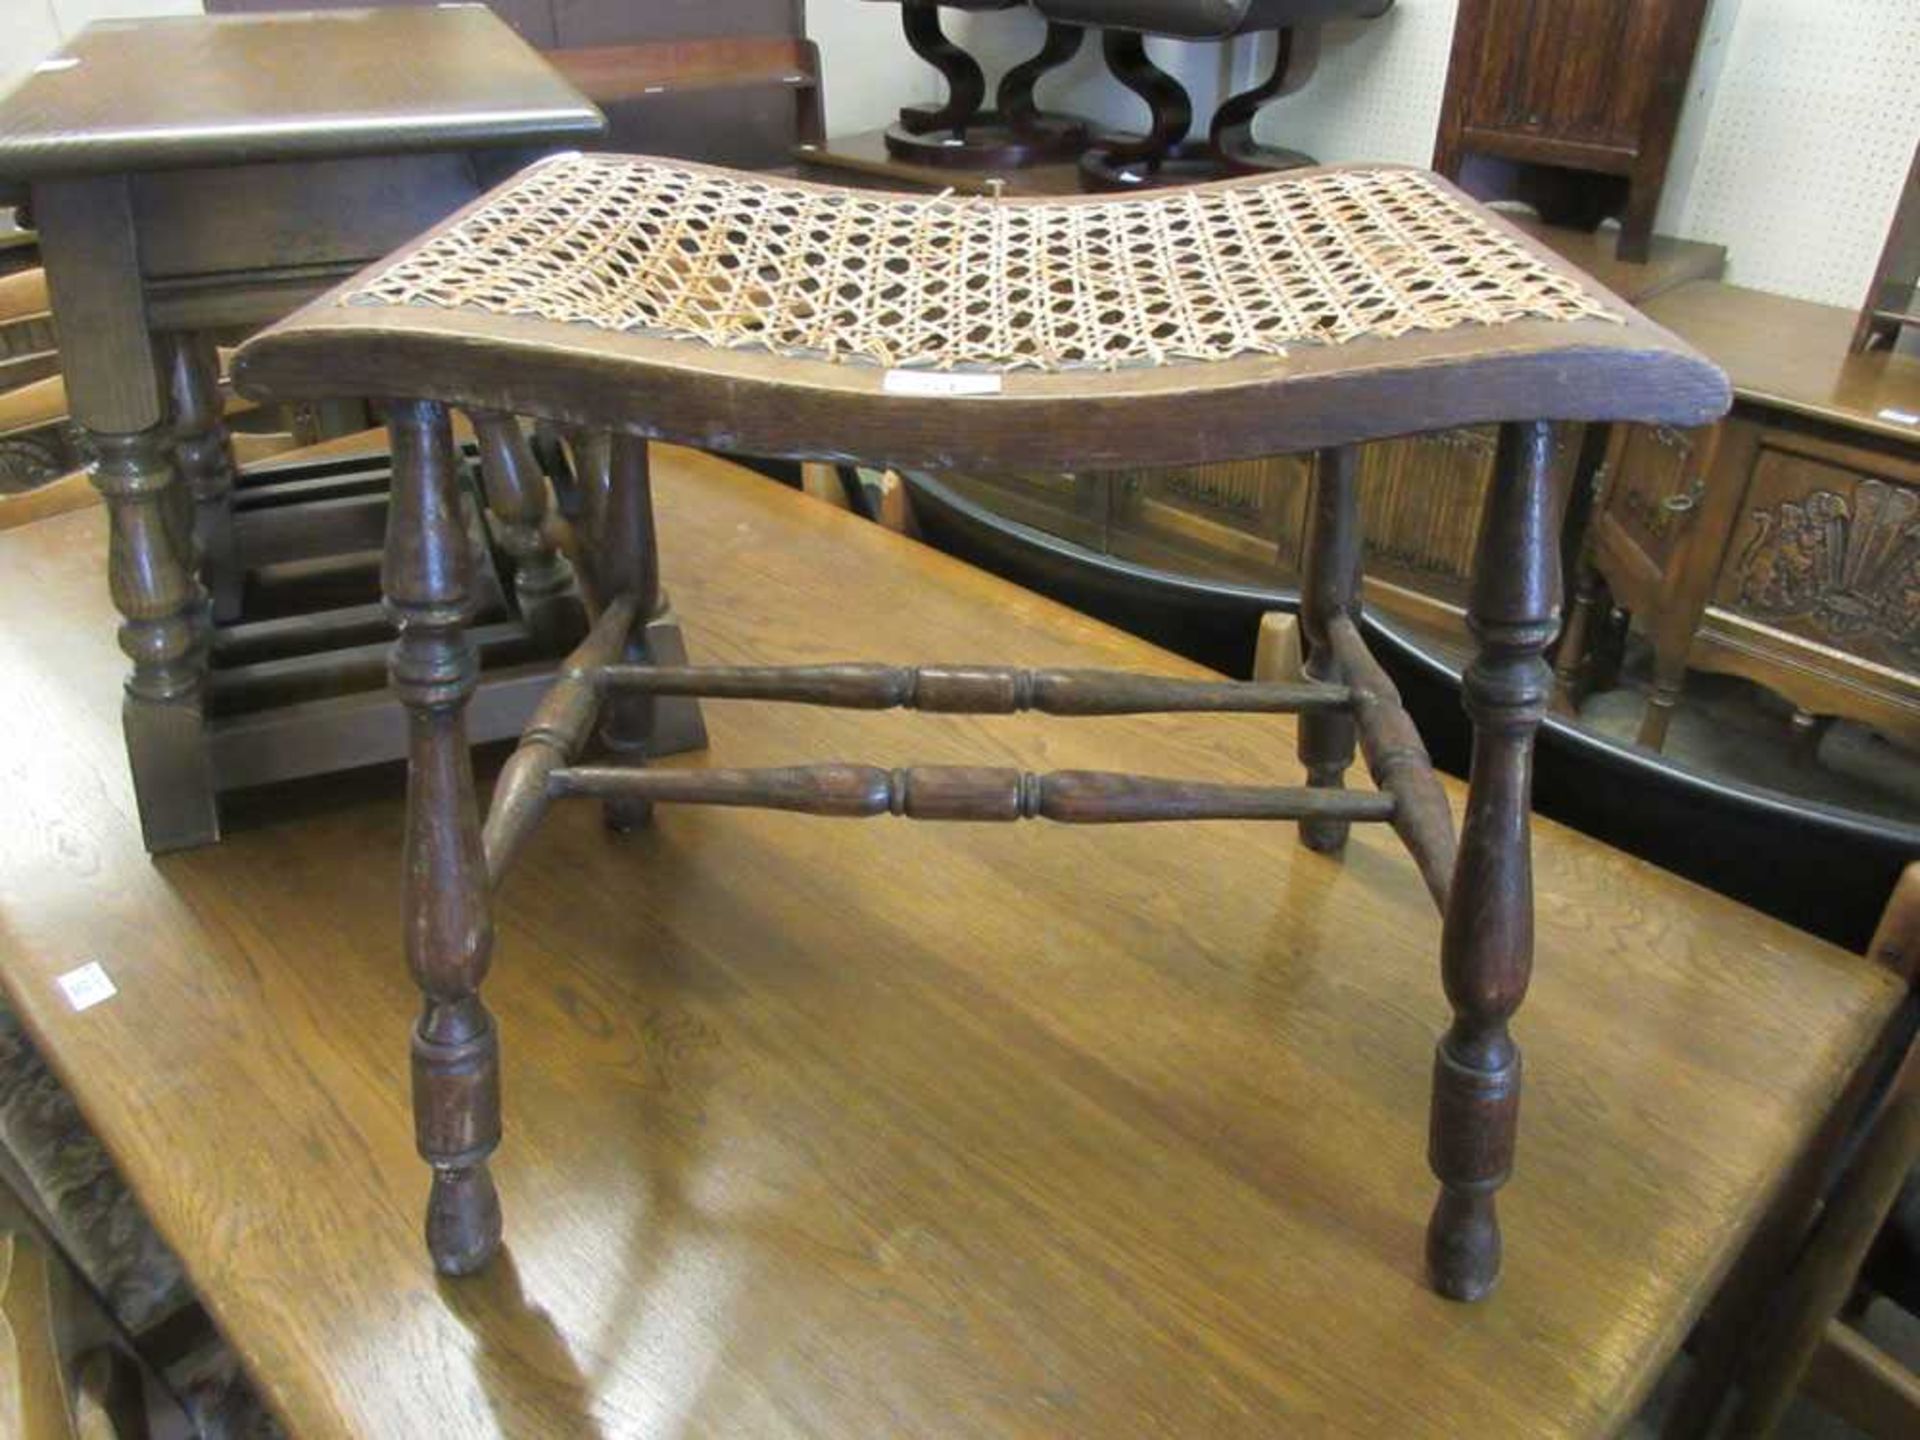 An early 20th century stool with cane seat